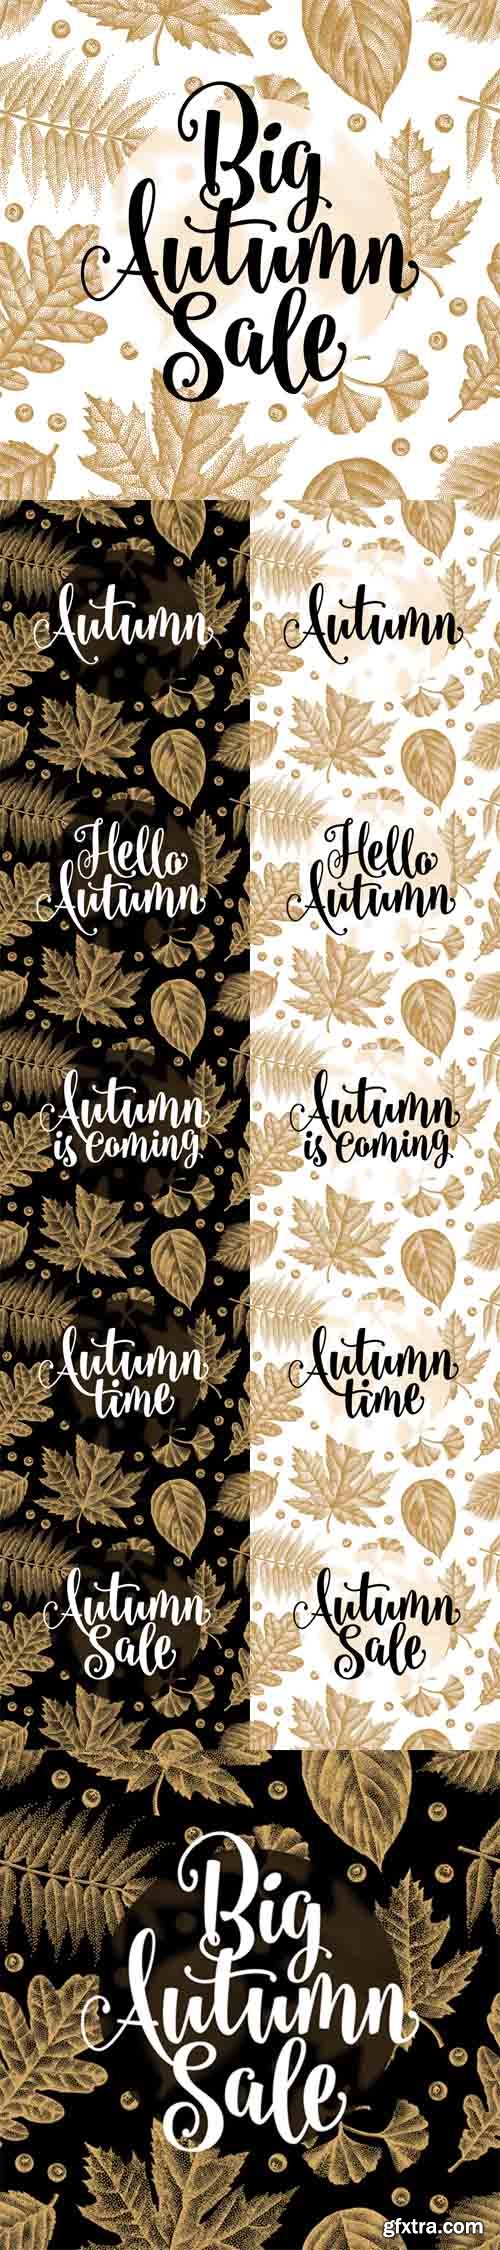 Vector Set - Autumn Sale Calligraphy Phrases on Leaves Background